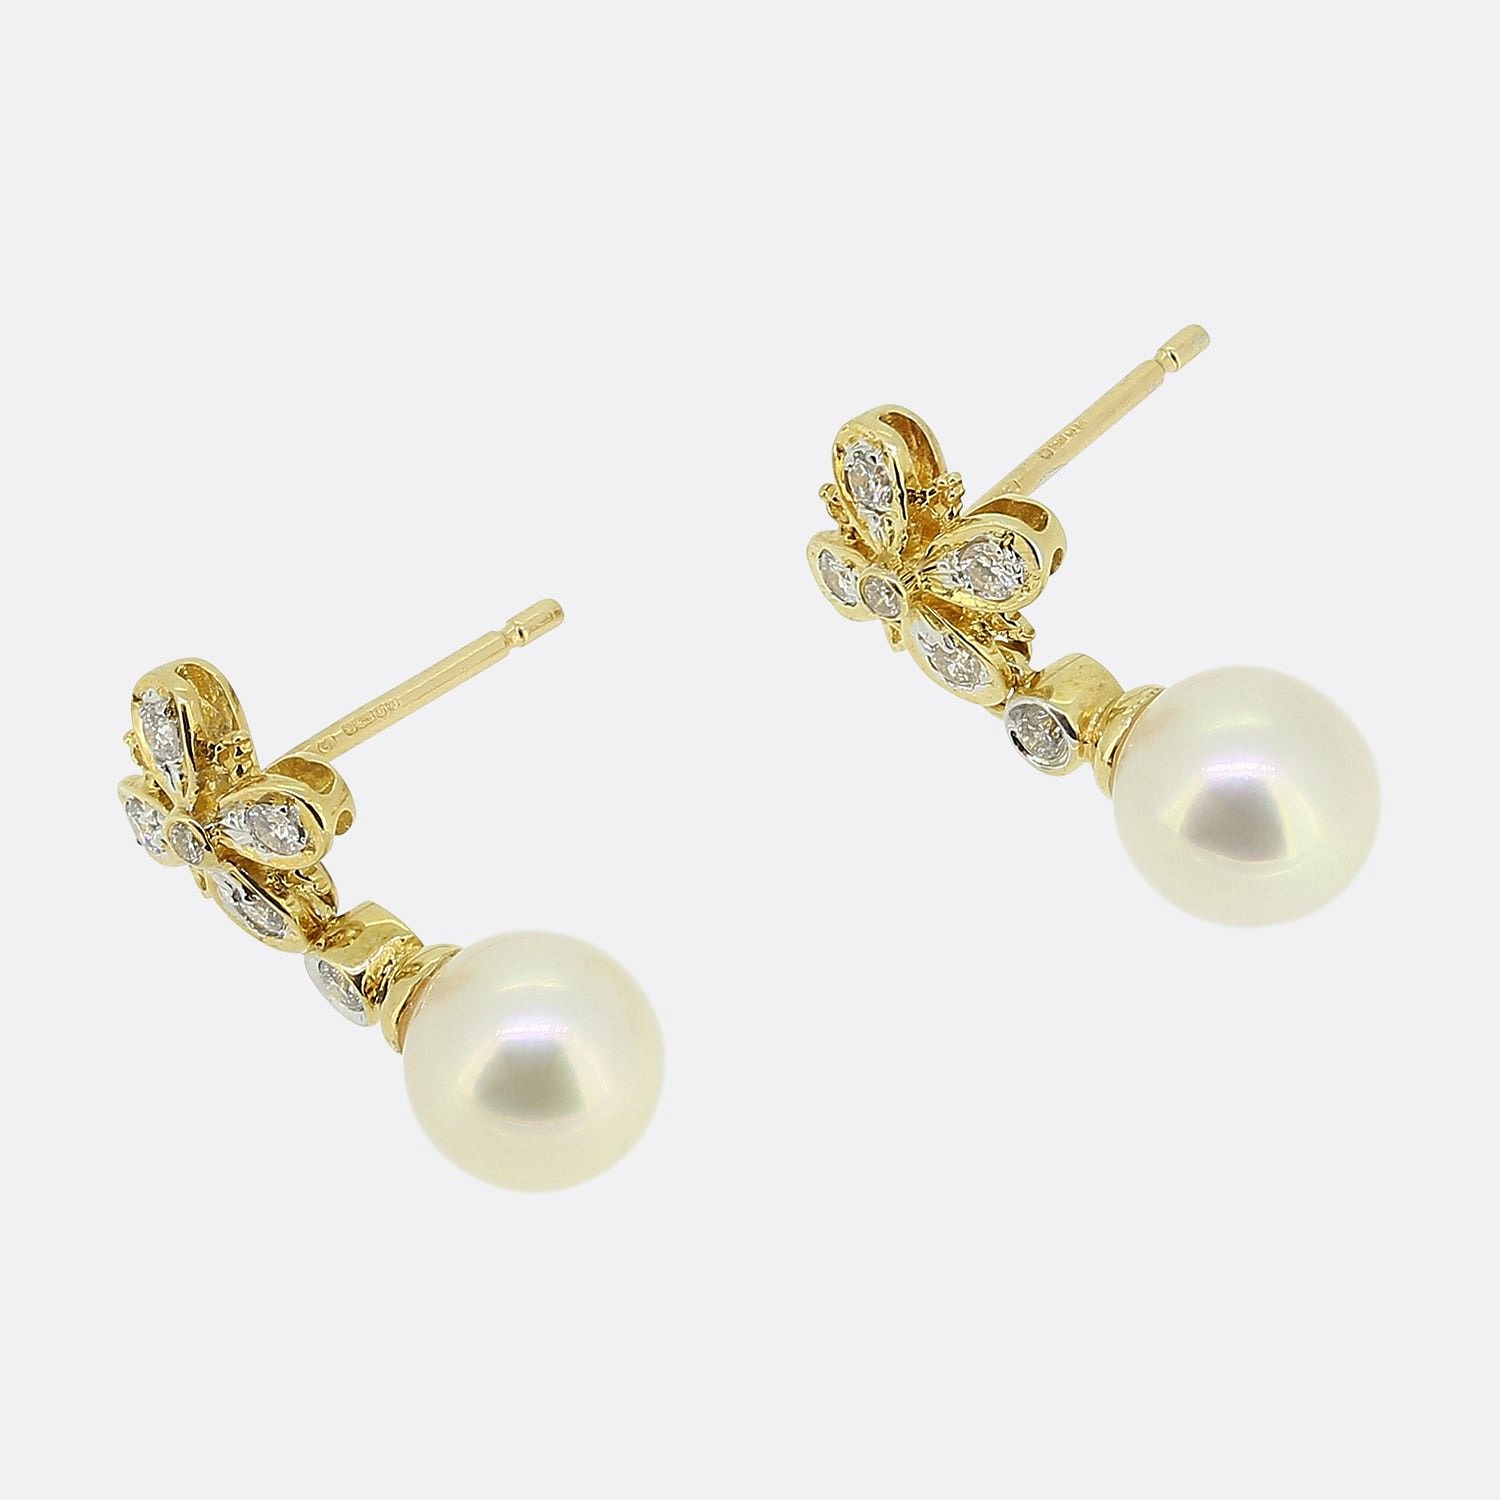 Pearl and Diamond Drop Earrings sold at auction on 25th April | Bidsquare